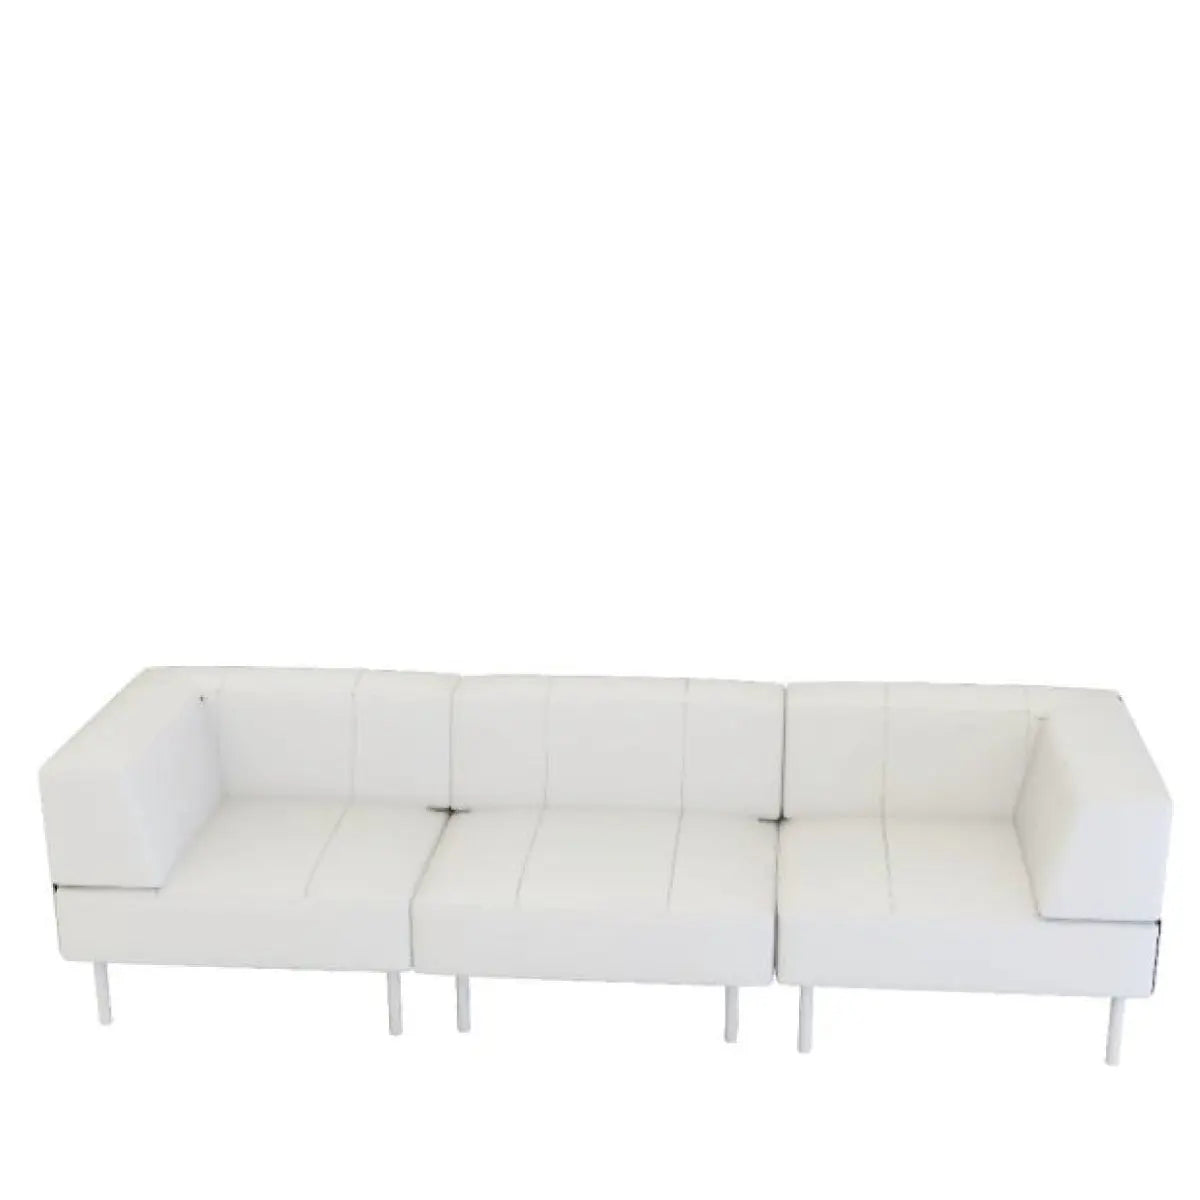 Endless 4 seater square sofa with arms Desert River Rentals